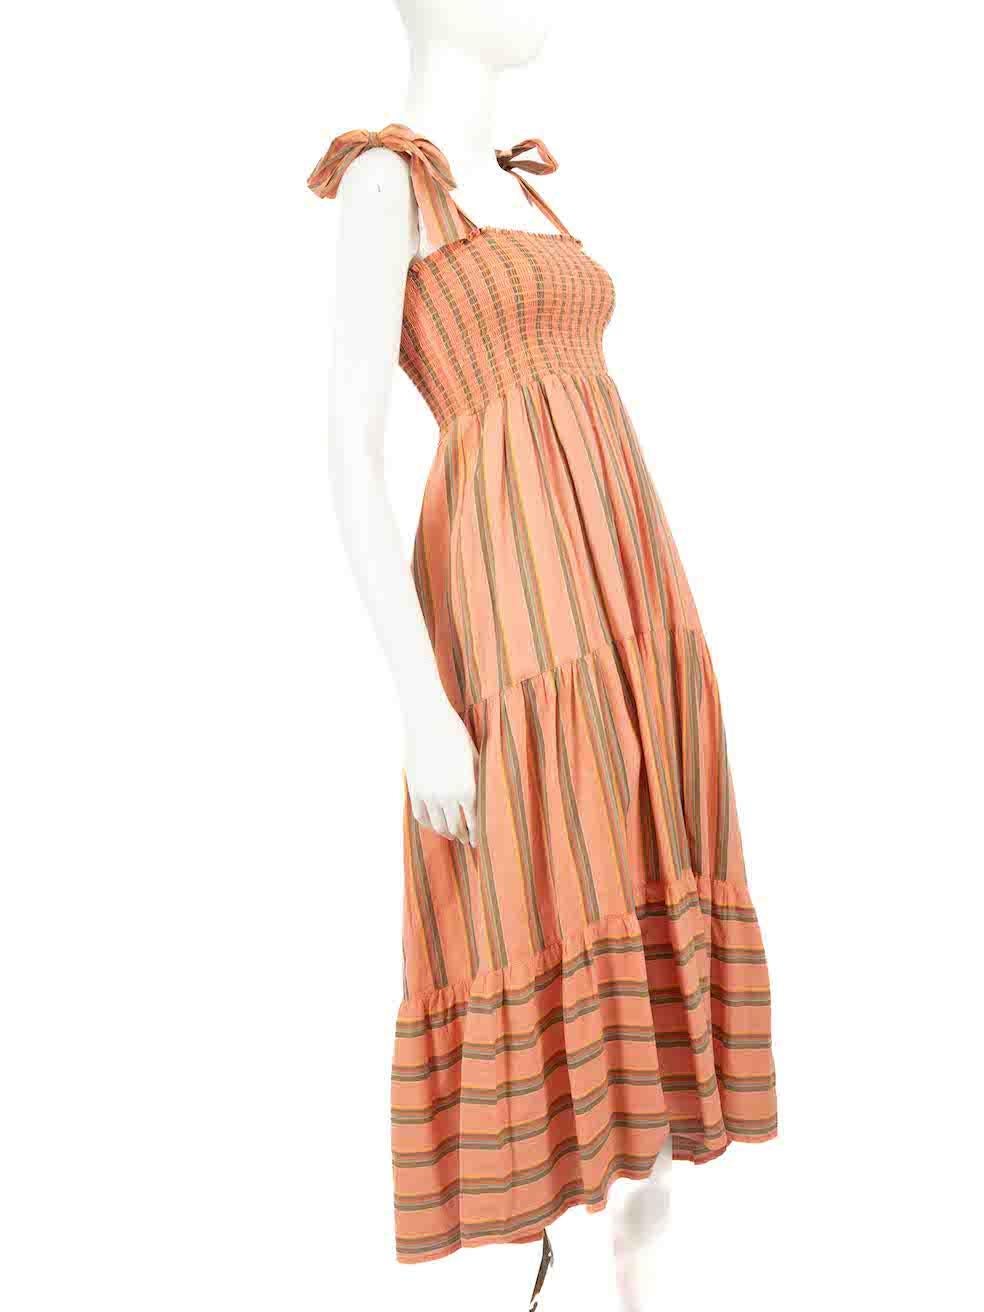 CONDITION is Very good. Minimal wear to dress is evident. Minimal wear to the dress is seen on the top detailing with some pulls to the weave and some near the hemline on this used Xirena designer resale item.
 
 
 
 Details
 
 
 Orange
 
 Cotton
 
